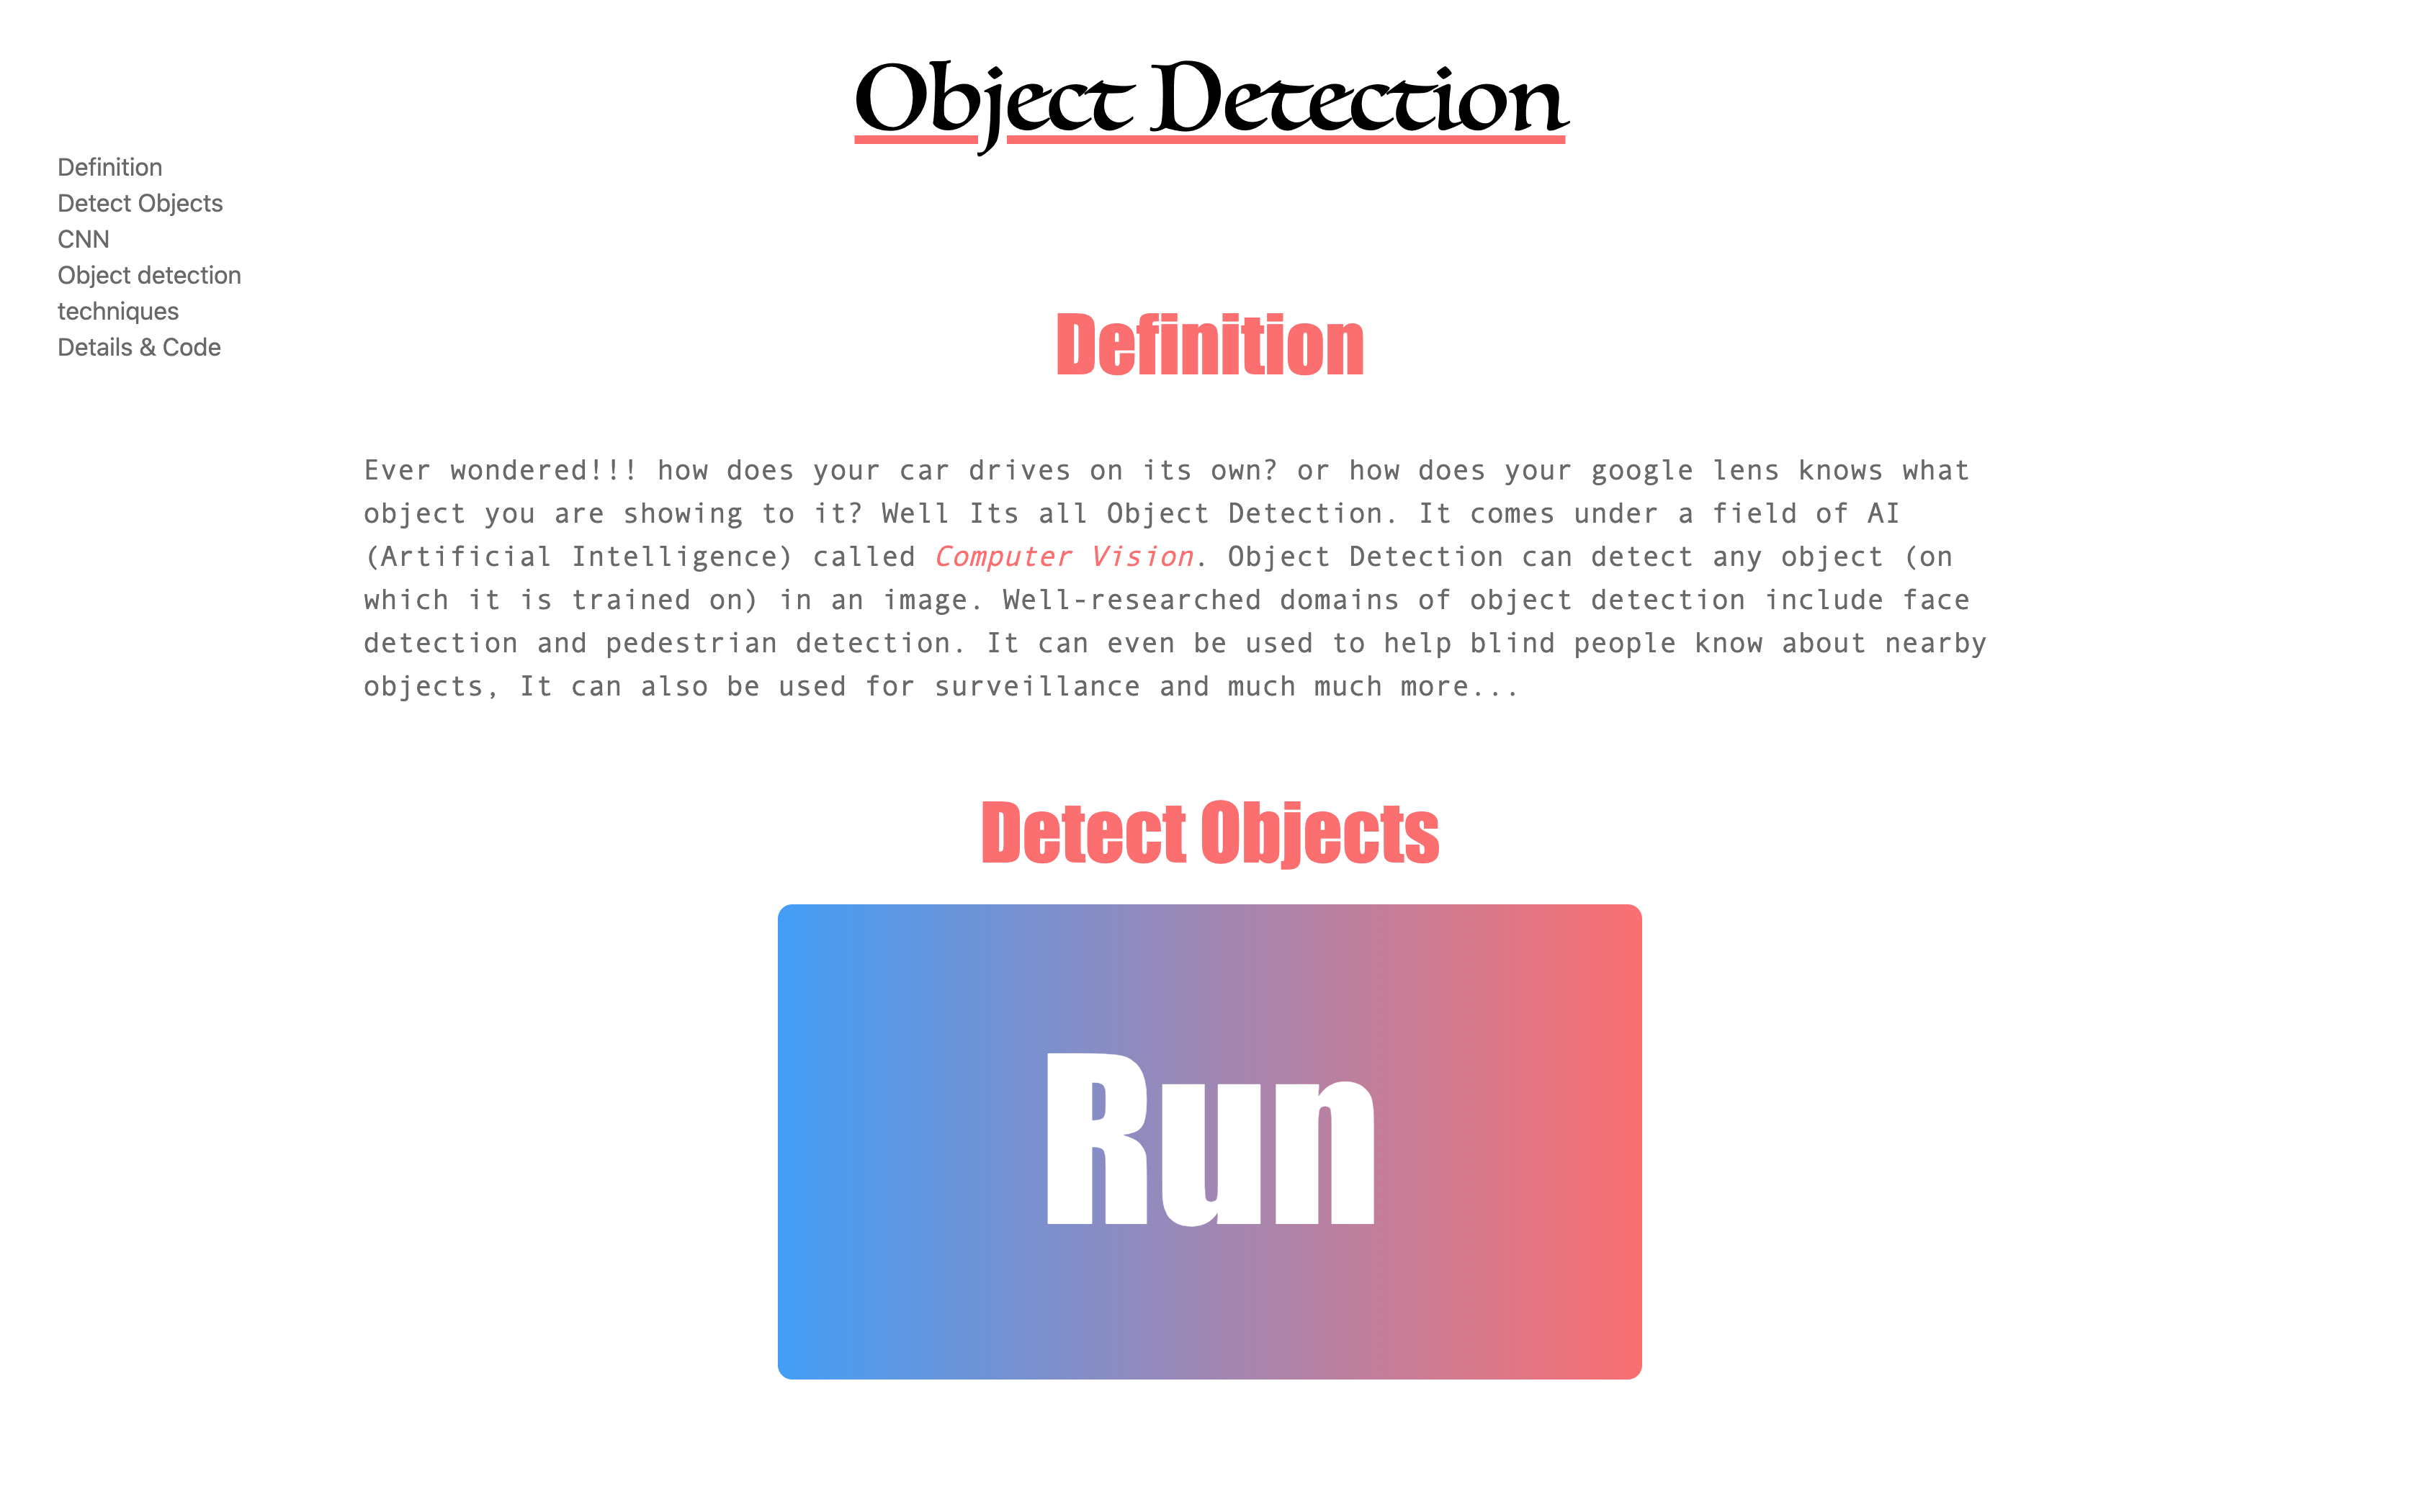 Object Detection page Layout